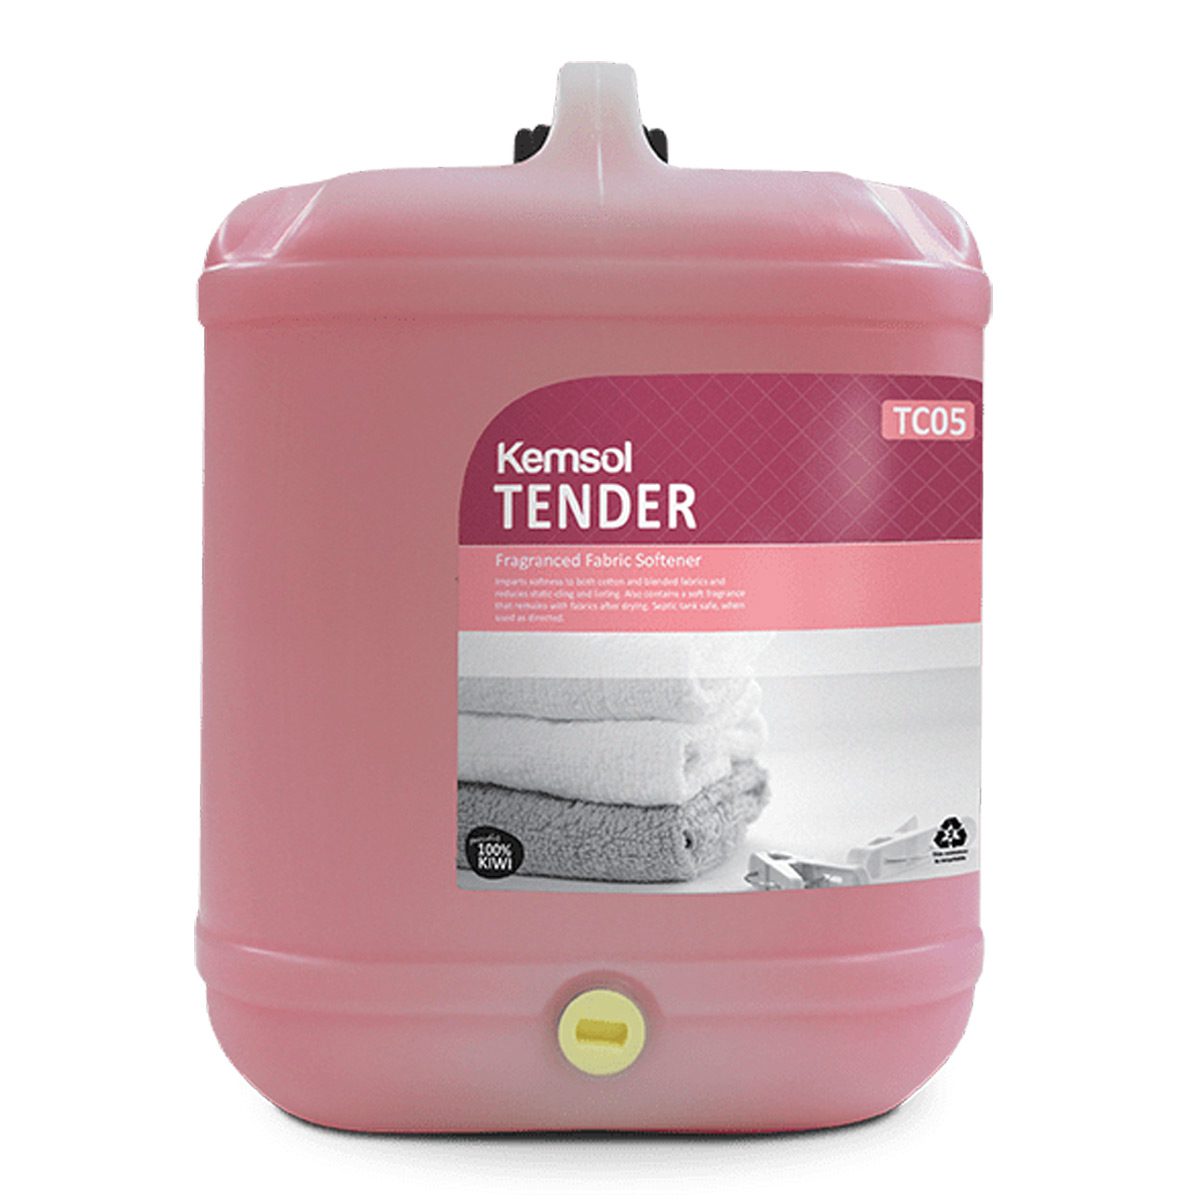 cleaning-products-laundry-kemsol-tender-fabric-softener-20L-litre-softness-cotton-blended-fabrics-reduces-static-cling-linting-soft fragrance-remains-fabrics-after-drying-vjs-distributors-KTEND20